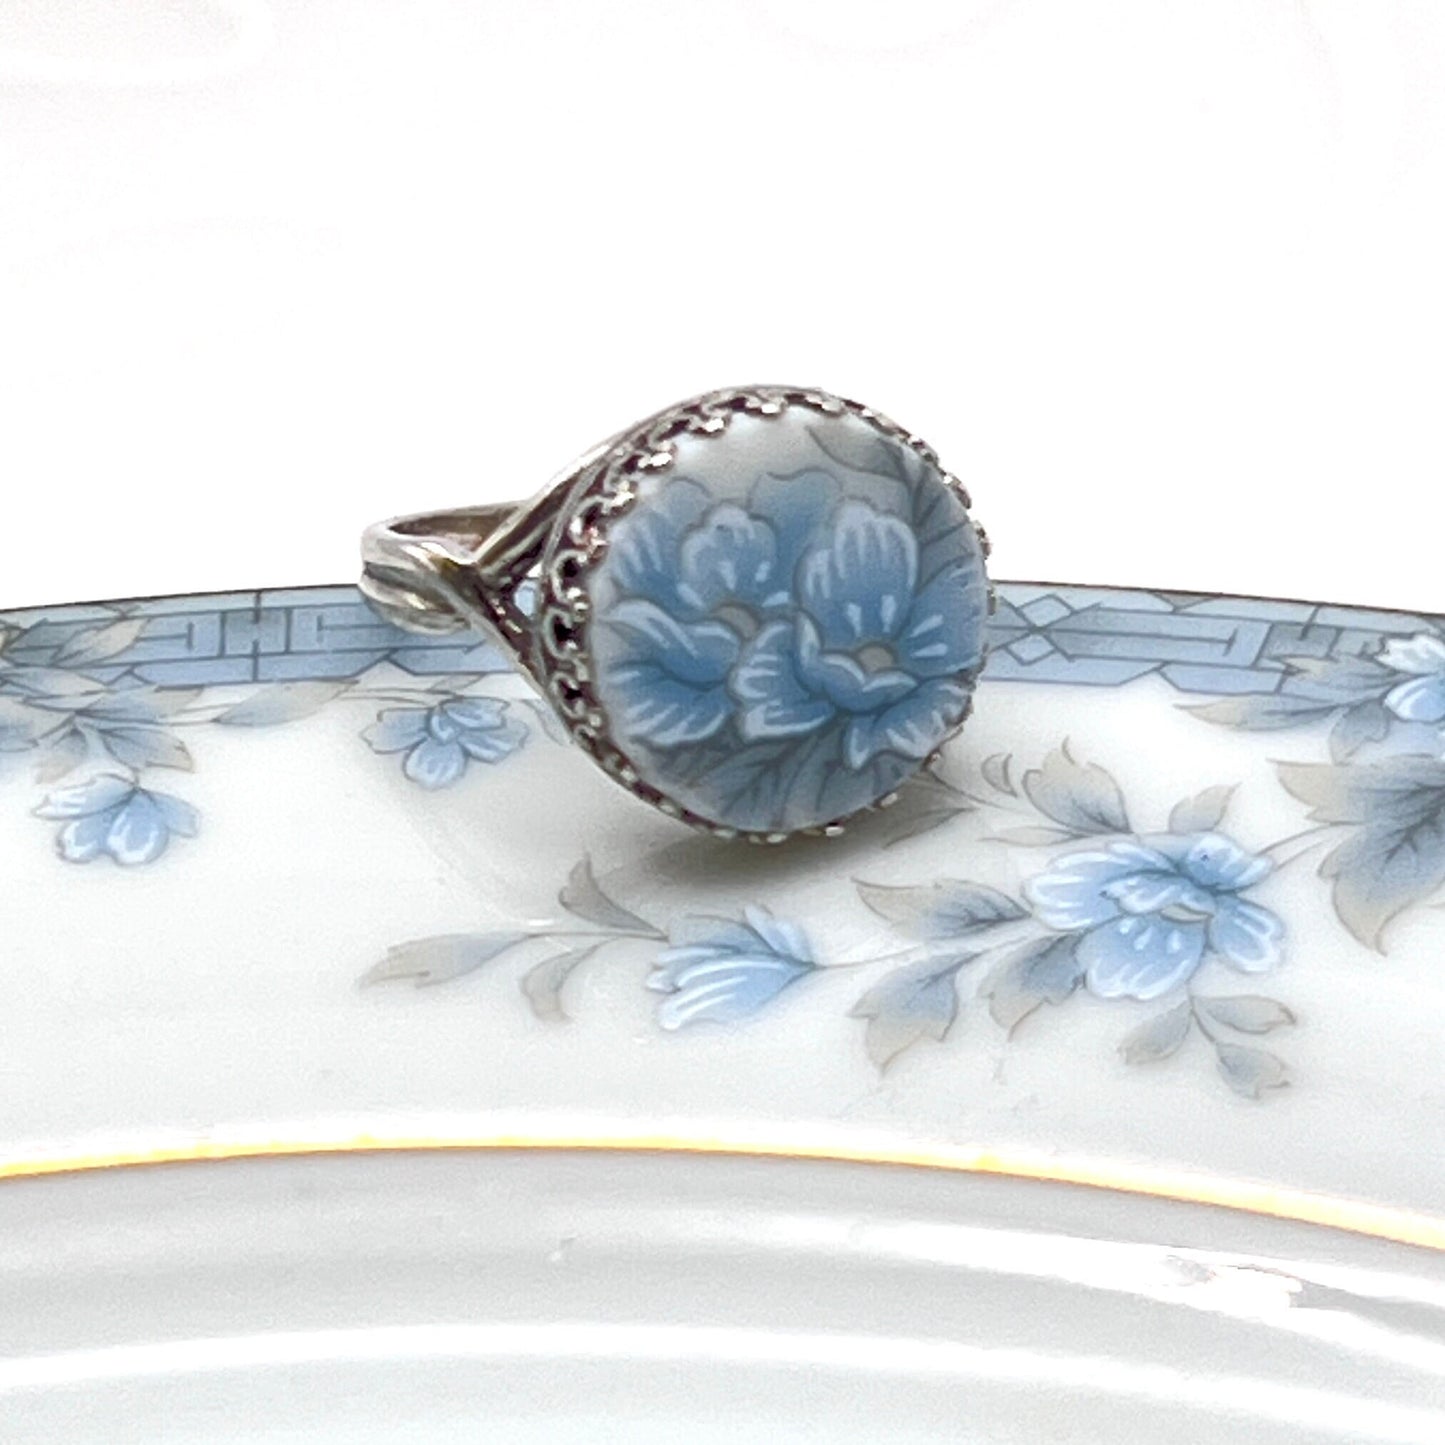 Broken China Jewelry Ring, Vintage Blue Japanese Porcelain, Gift for Her